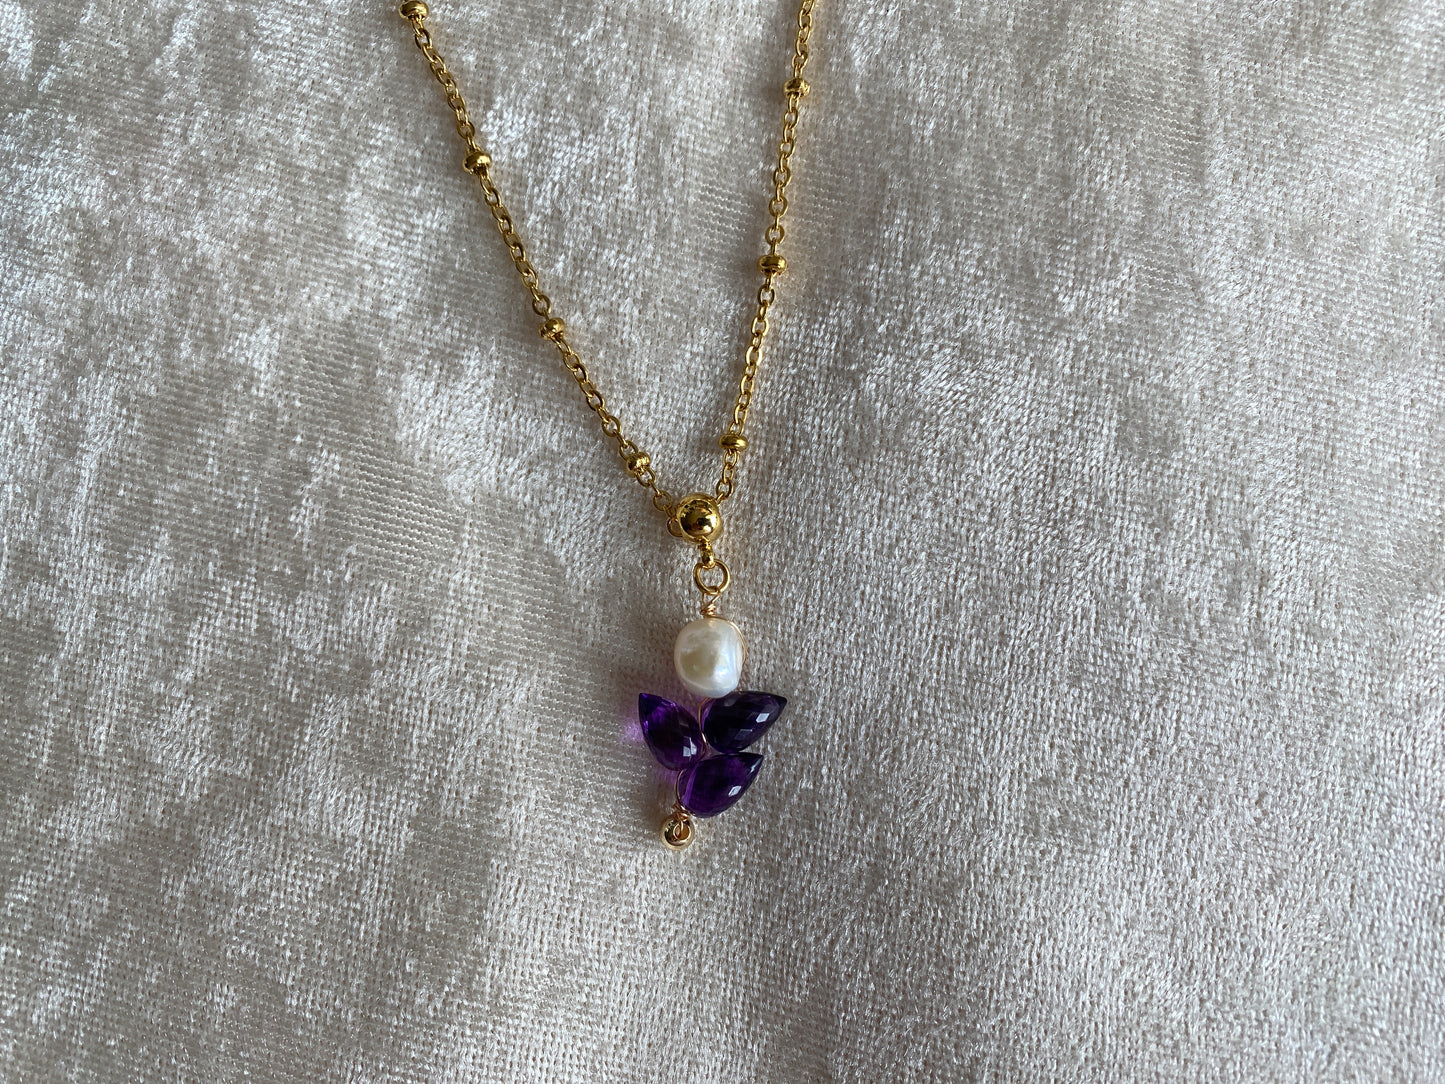 The Blossom Collection - Amethyst